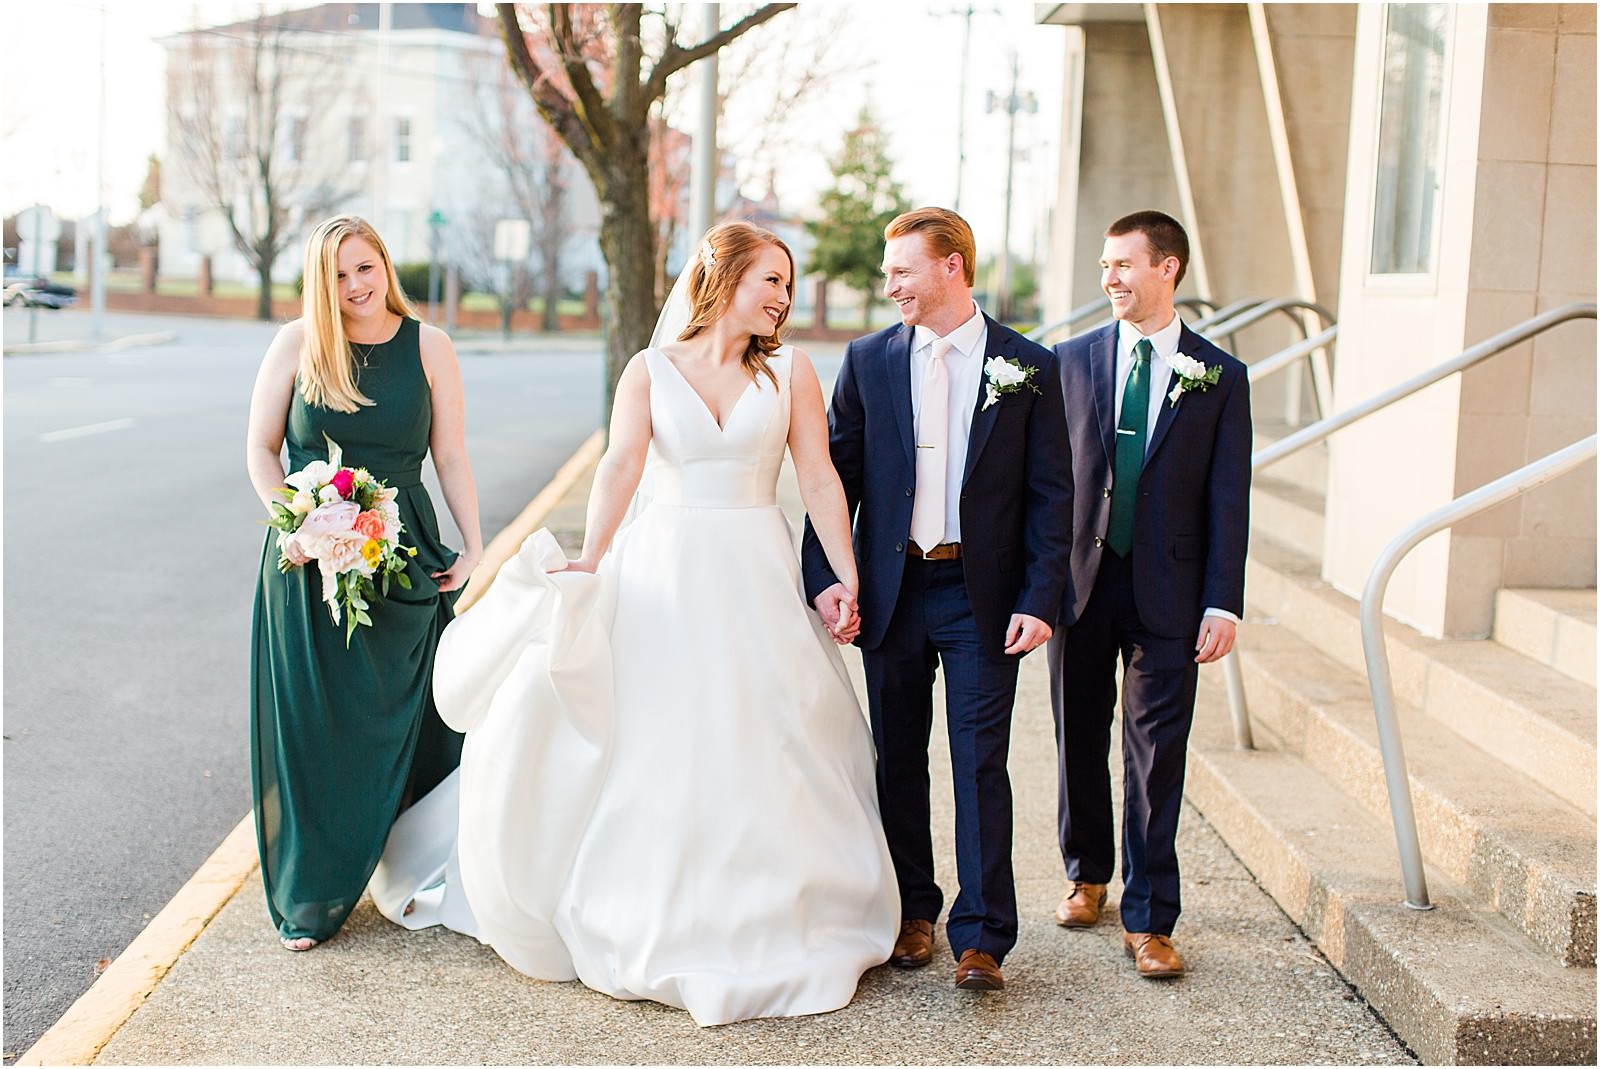 A Perfectly Intimate Wedding in Downtown Evansville Indiana | Jennah and Steve | Bret and Brandie Photography | | 0083.jpg